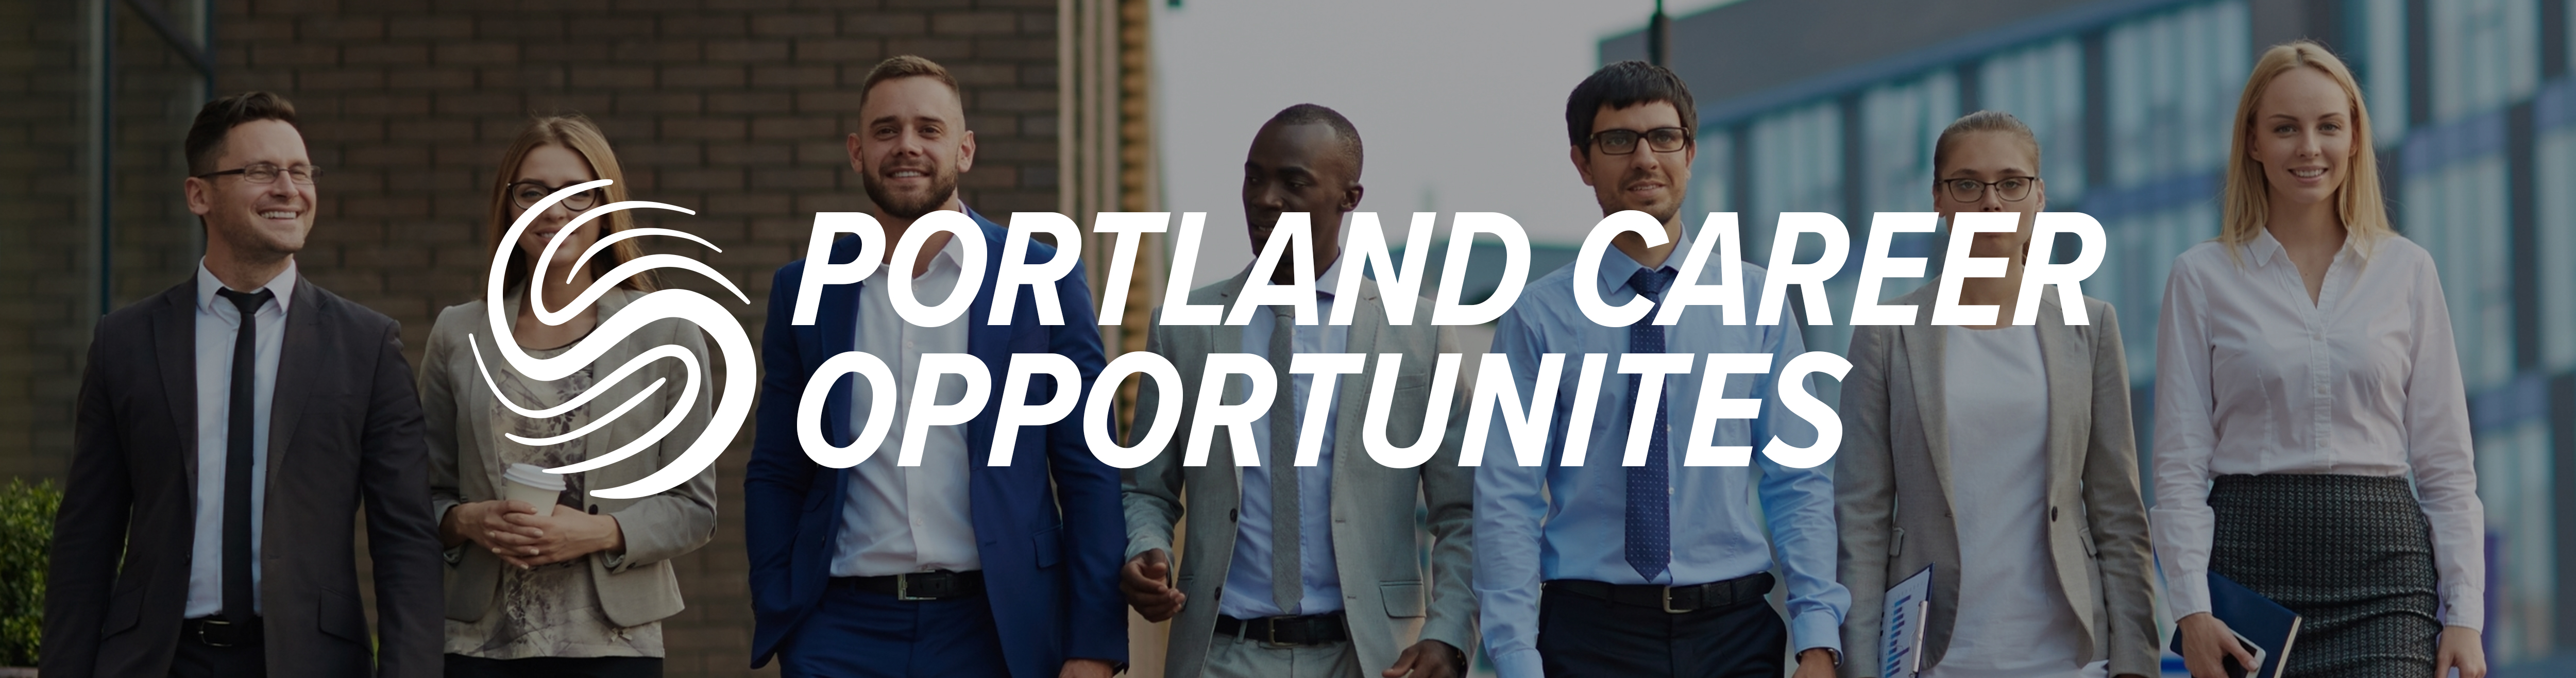 Portland Career Opportunities, Specialized Recruiting Group